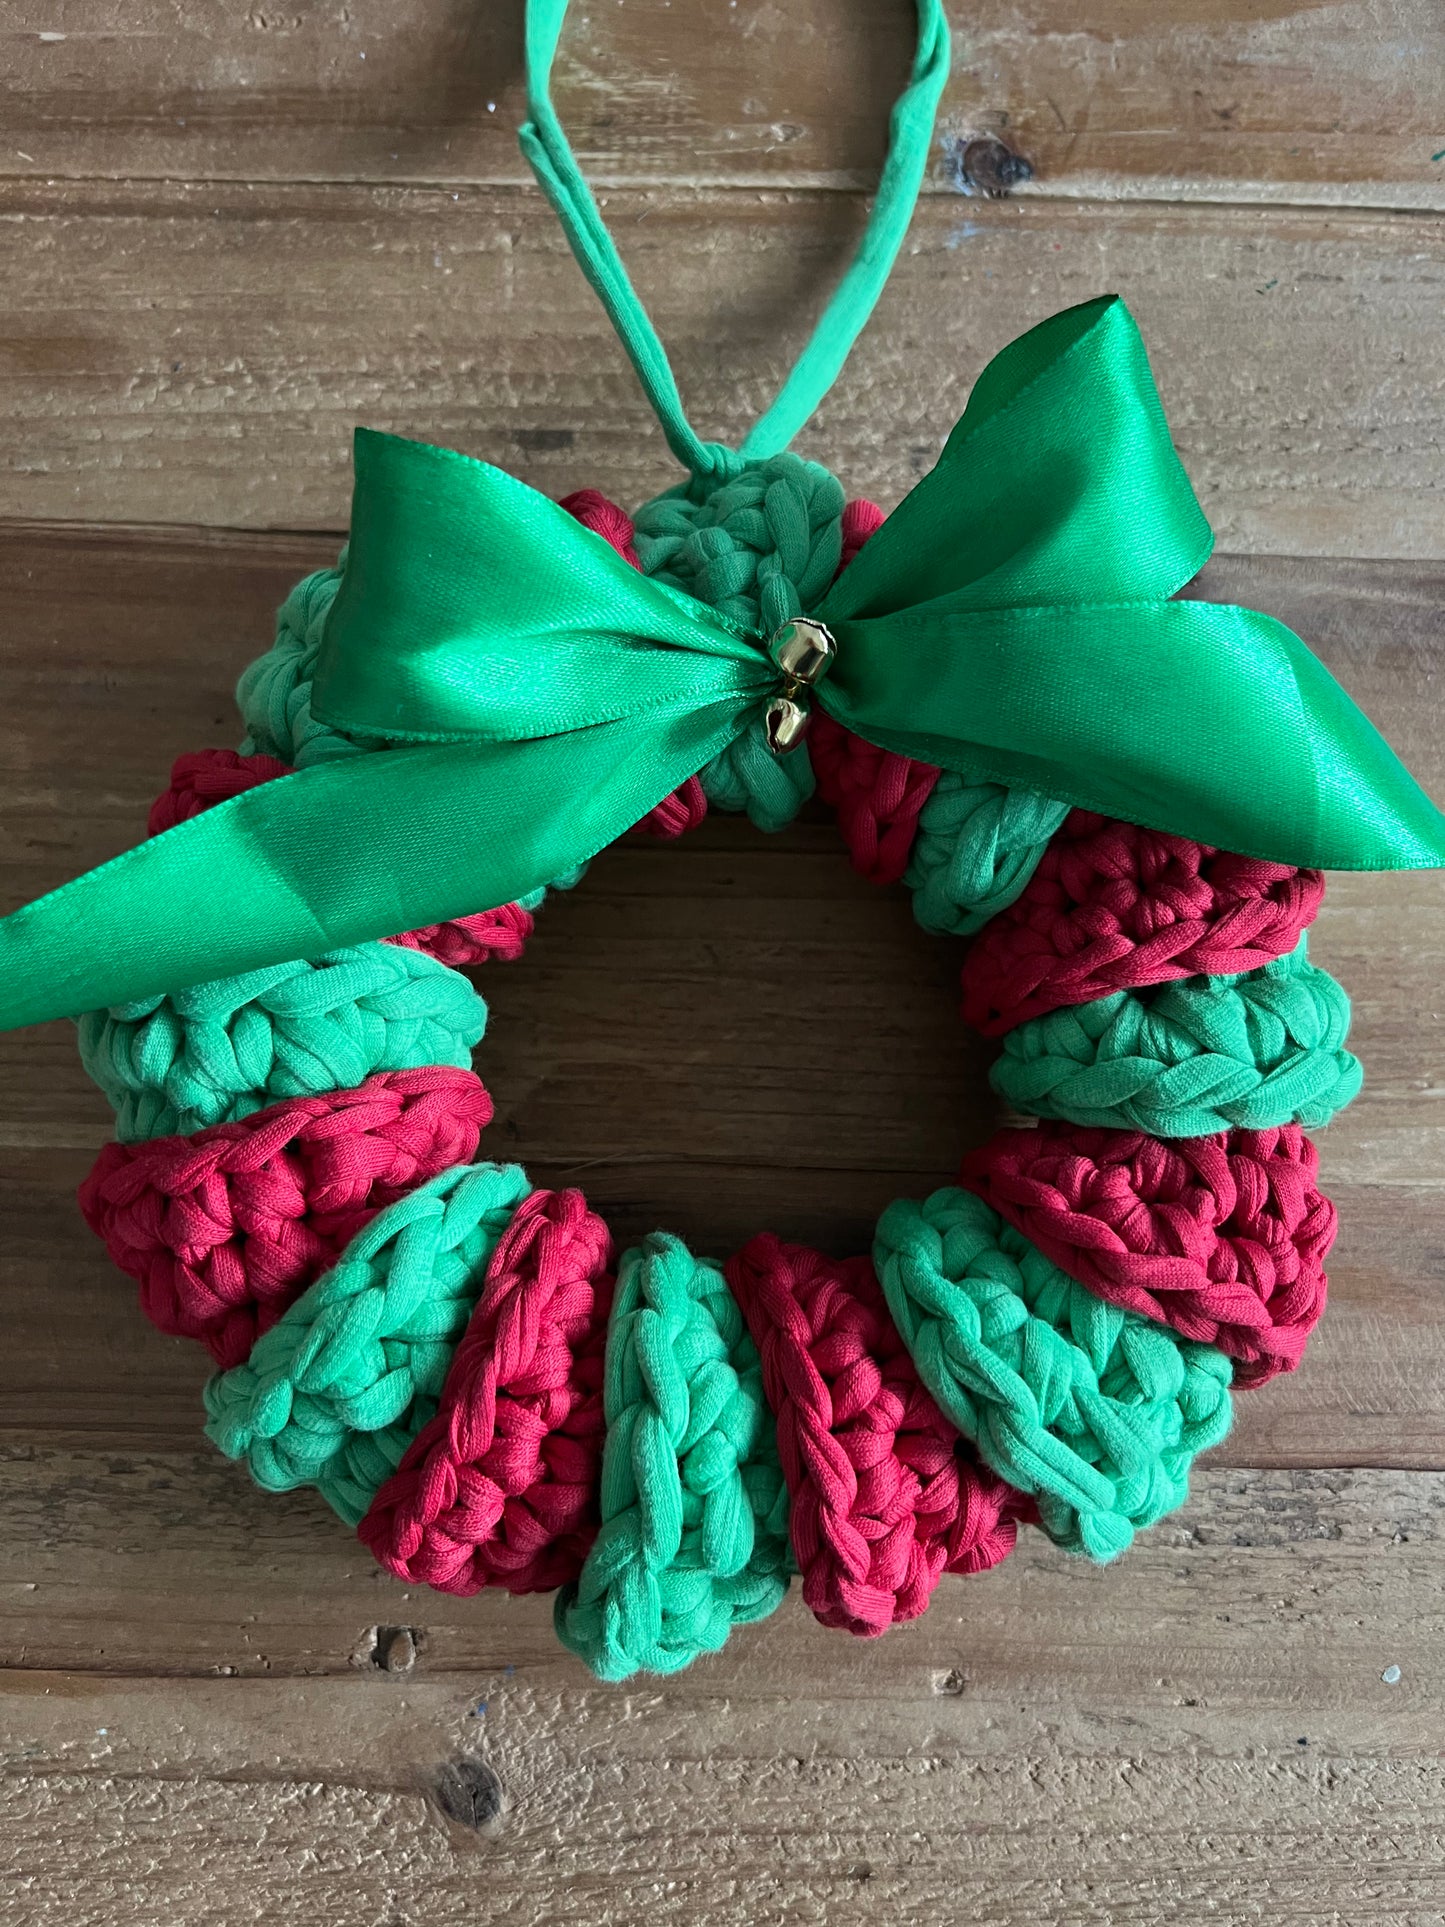 Guest artist: Christmas wreath for front door, handmade Christmas crochet wreath by guest artist Emese, holiday decoration, Vintage Crochet Christmas Wreath